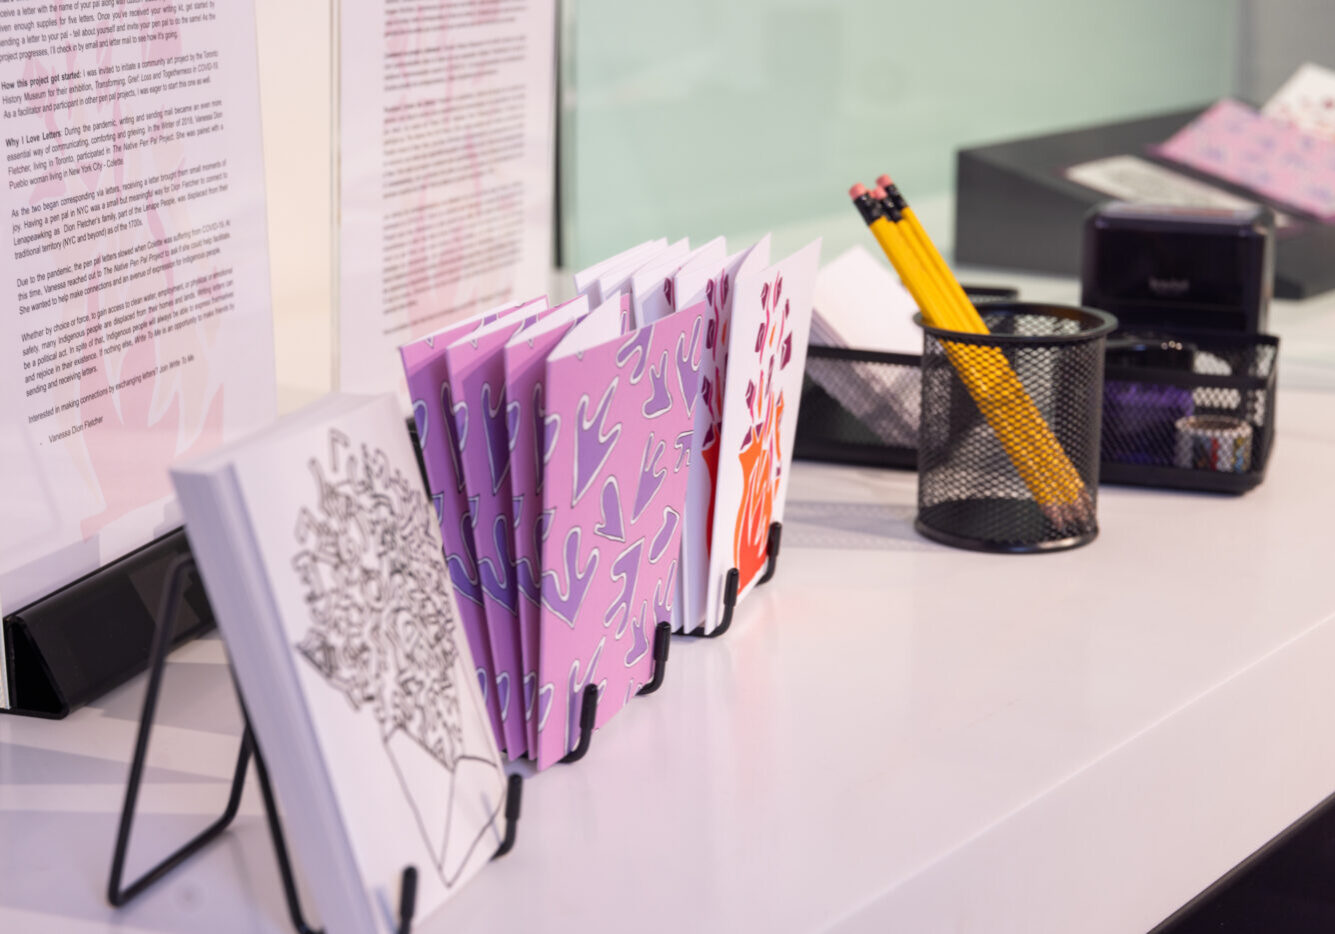 Cards with graphic drawings on them on display as part of Write to Me by Vanessa Dion Fletcher.